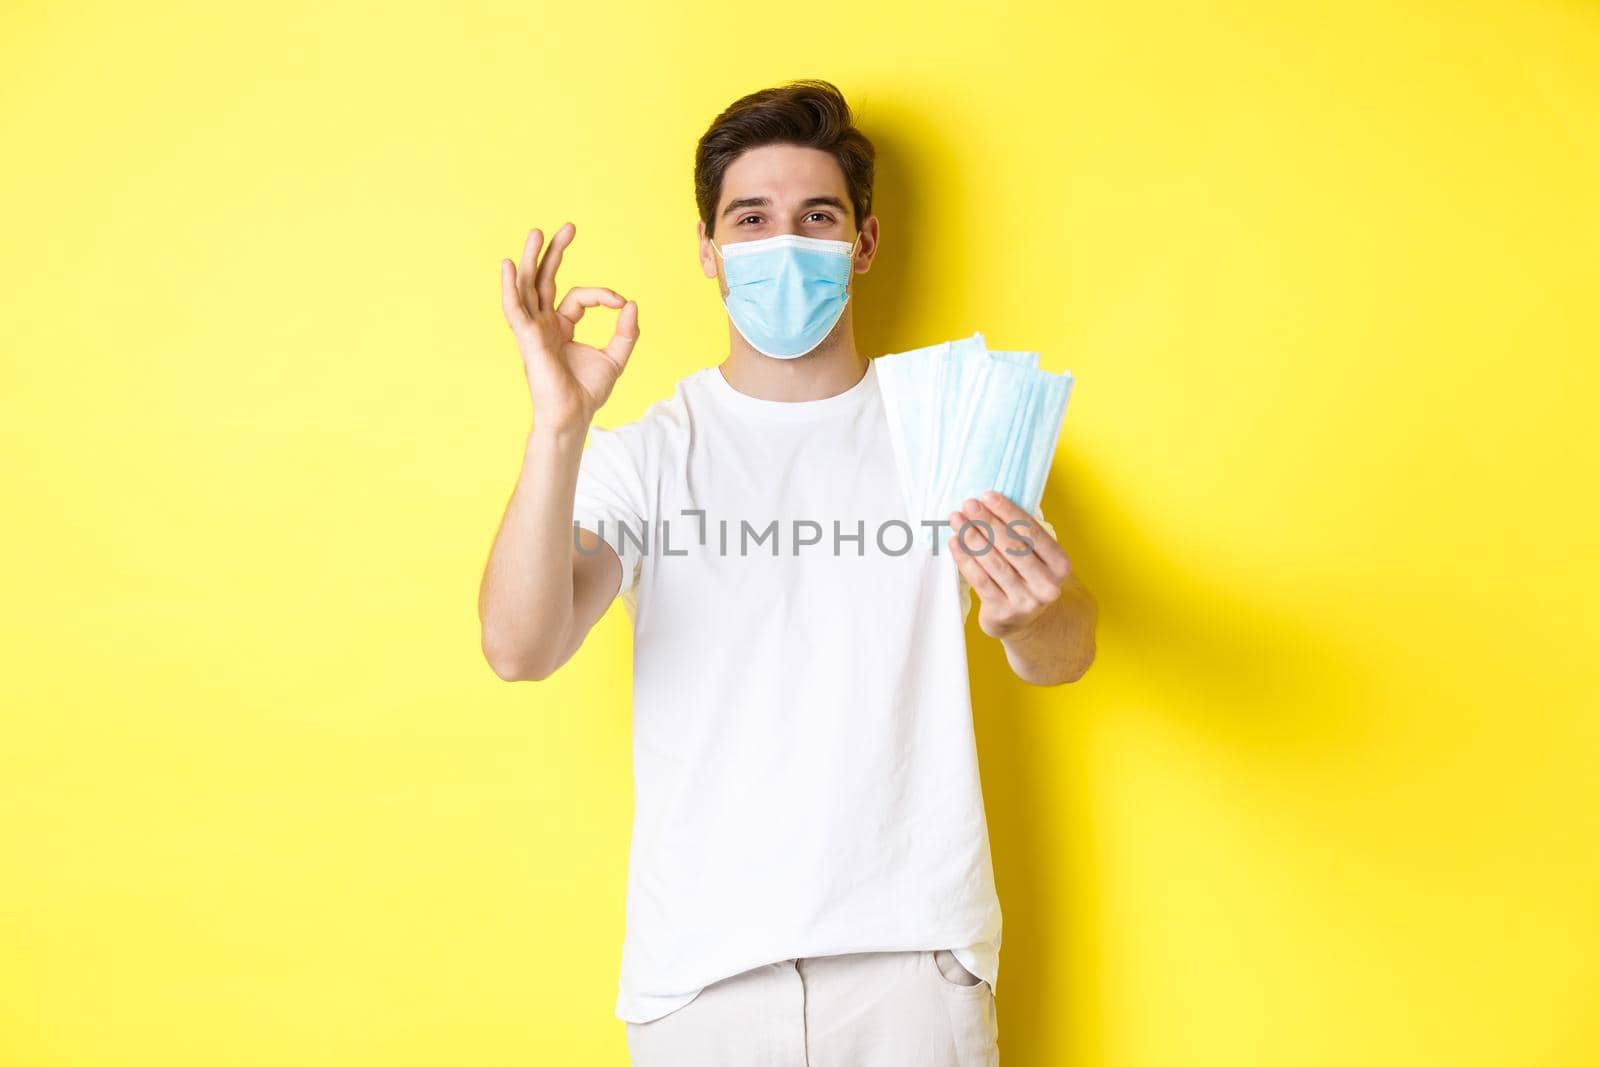 Concept of covid-19, quarantine and preventive measures. Satisfied man showing okay sign and giving medical masks, standing over yellow background.